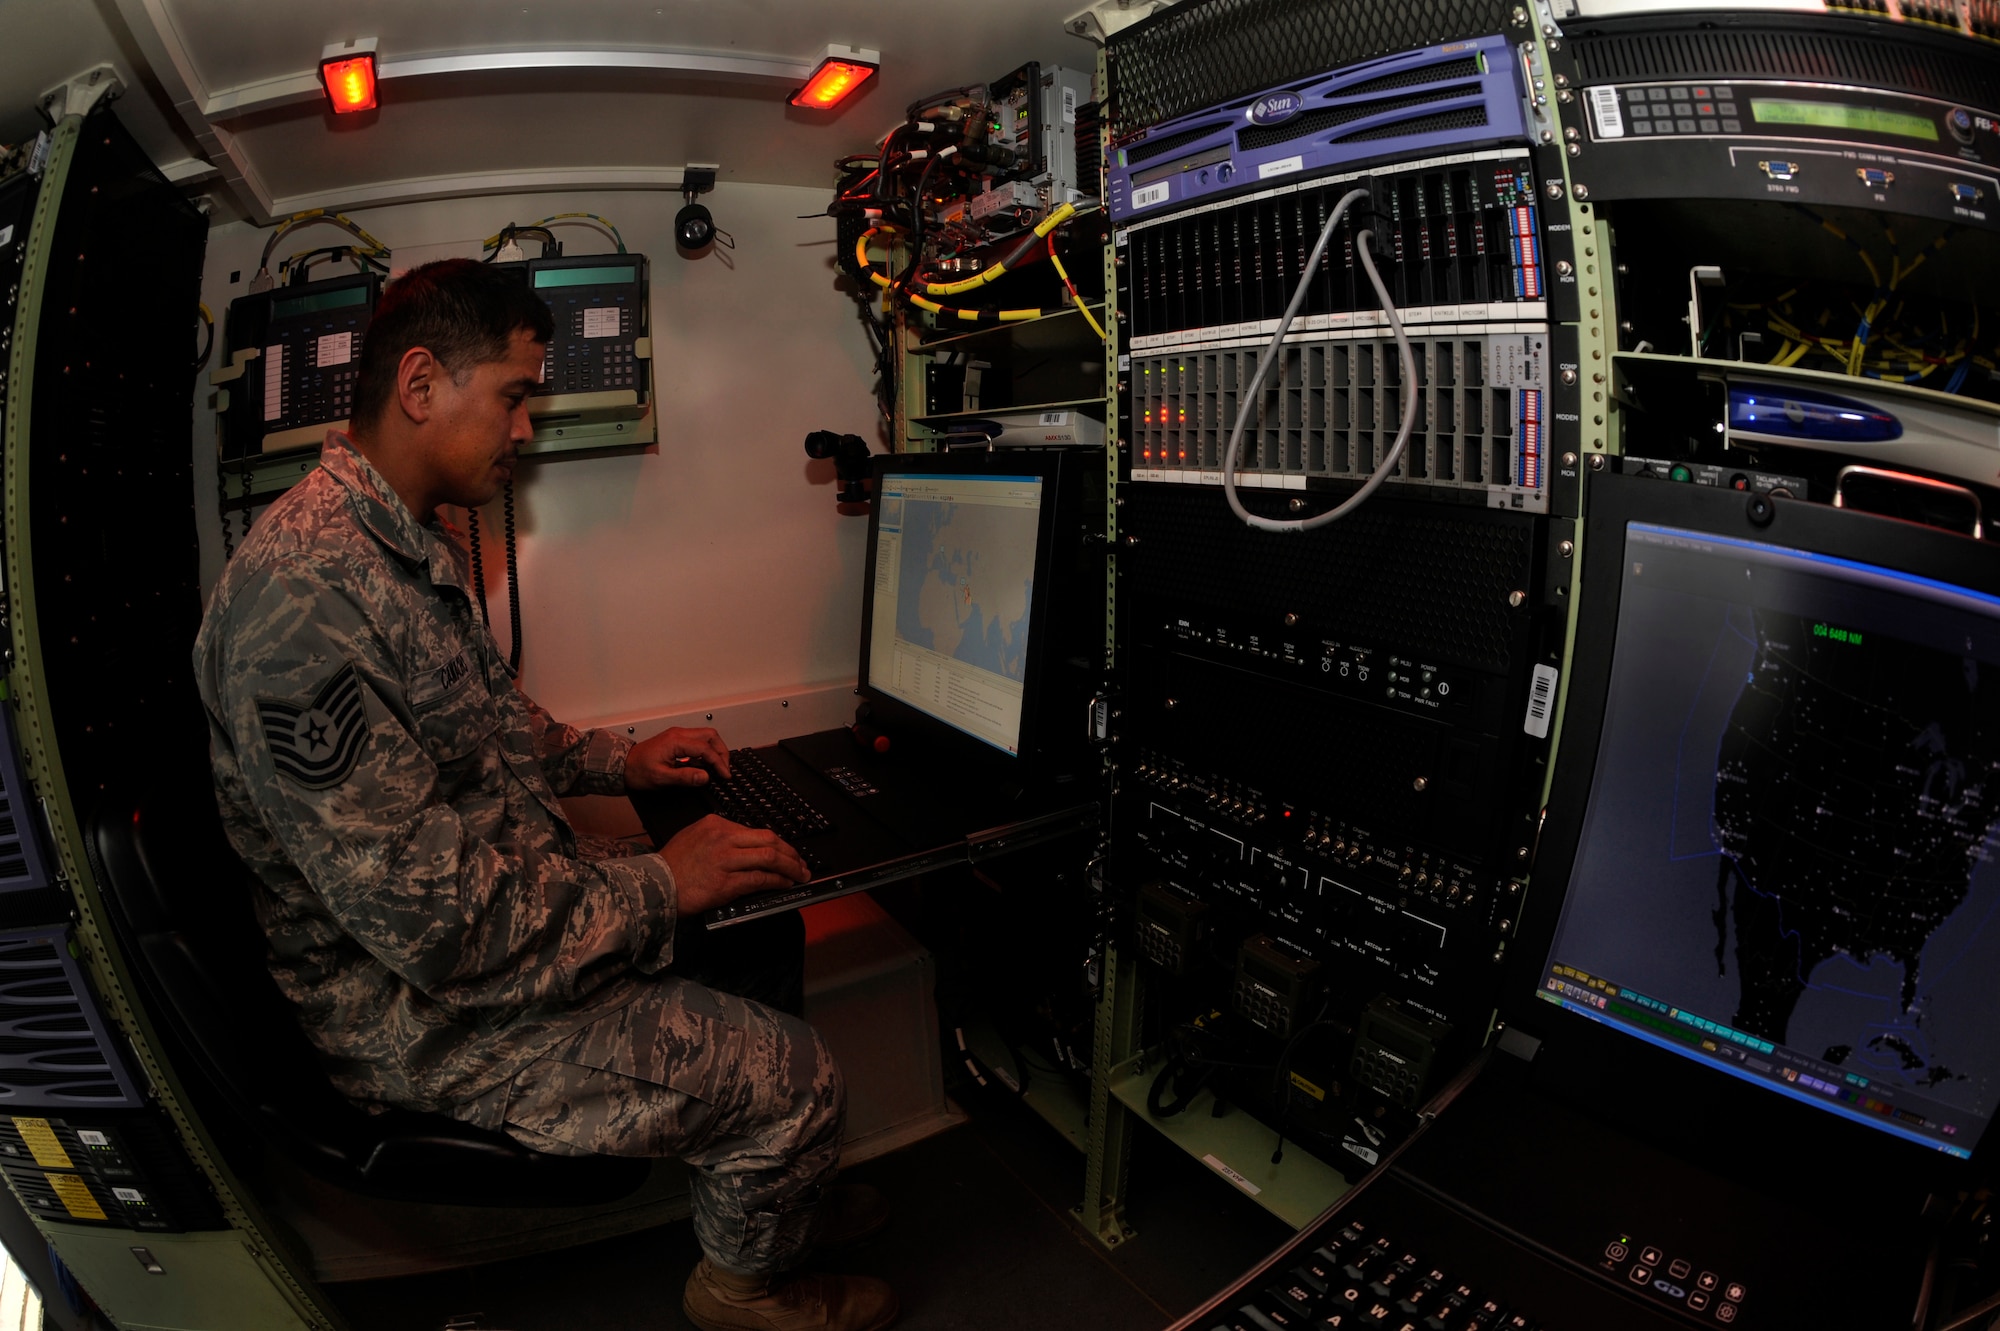 Oregon Air National Guard Tech. Sgt. Ricardo Camacho of the 116th Air Control Squadron operates in a network cyber transport computer during pre-deployment training in preporation for Operation Enduring Freedom, at Camp Rilea, Ore., on February 3, 2001. Camacho is about to embark on his second deployment to the Middle East and has been with the 116th since 2007. (U.S. Air Force photograph by Tech. Sgt. John Hughel, 142nd Fighter Wing Public Affairs)